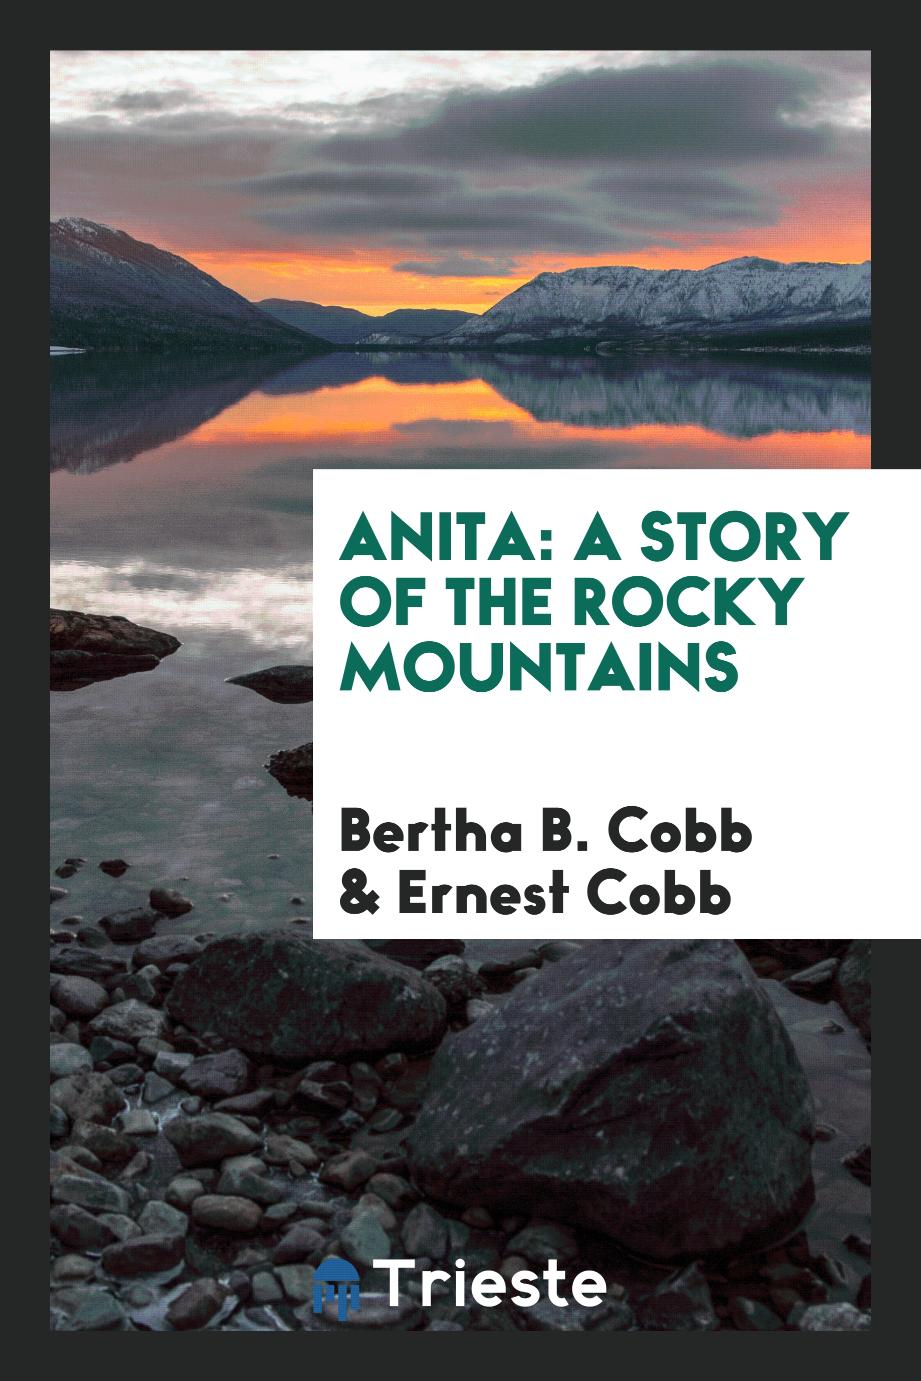 Anita: A Story of the Rocky Mountains